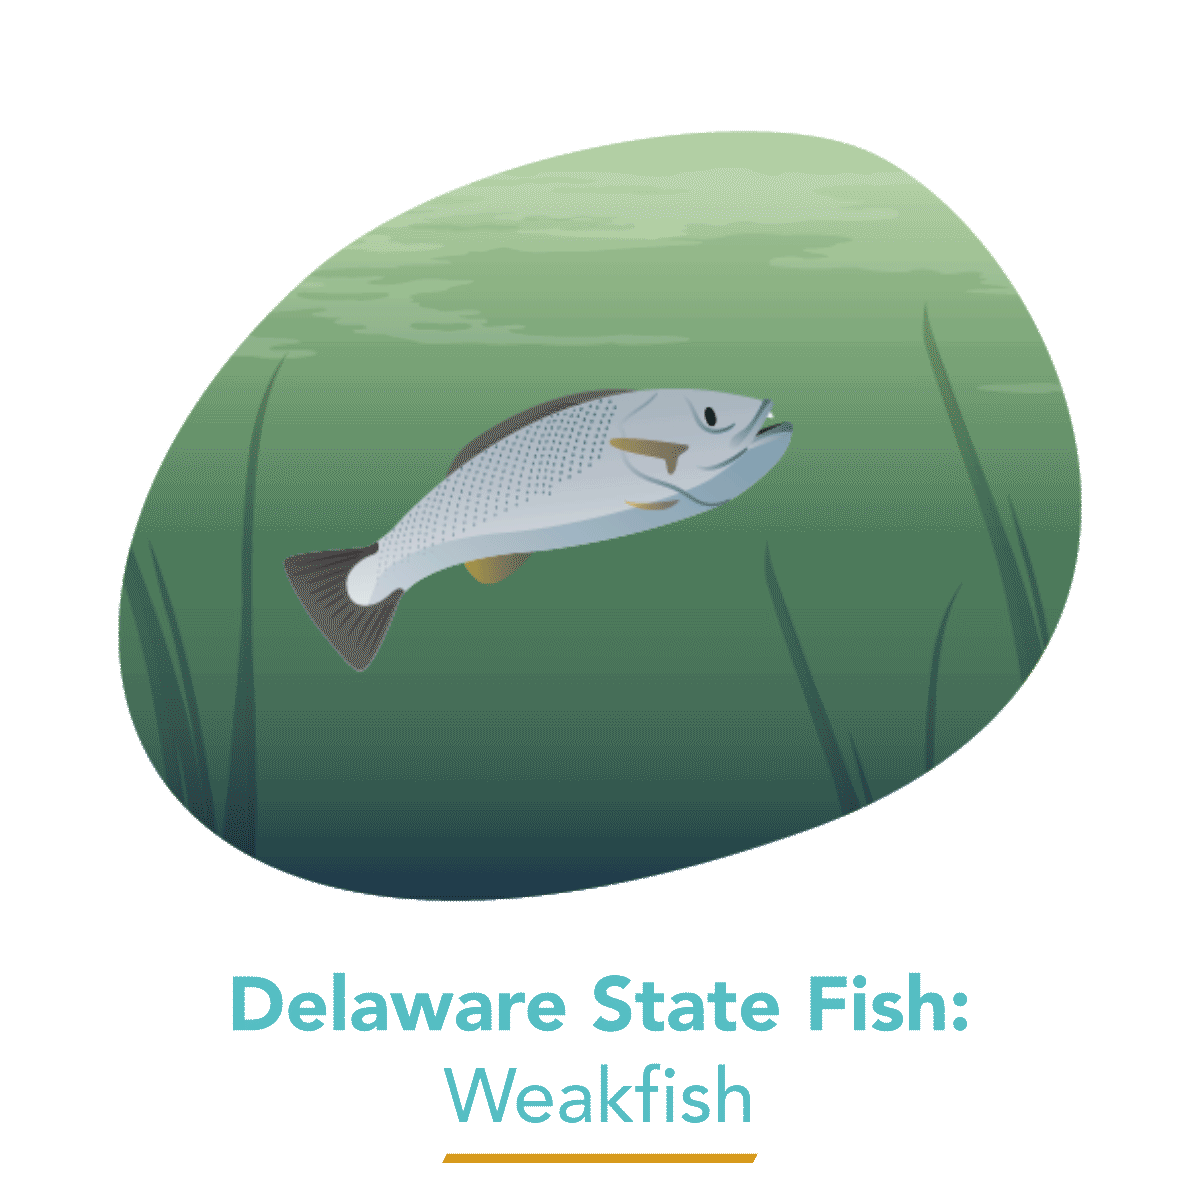  Weakfish - Delaware's State Fish